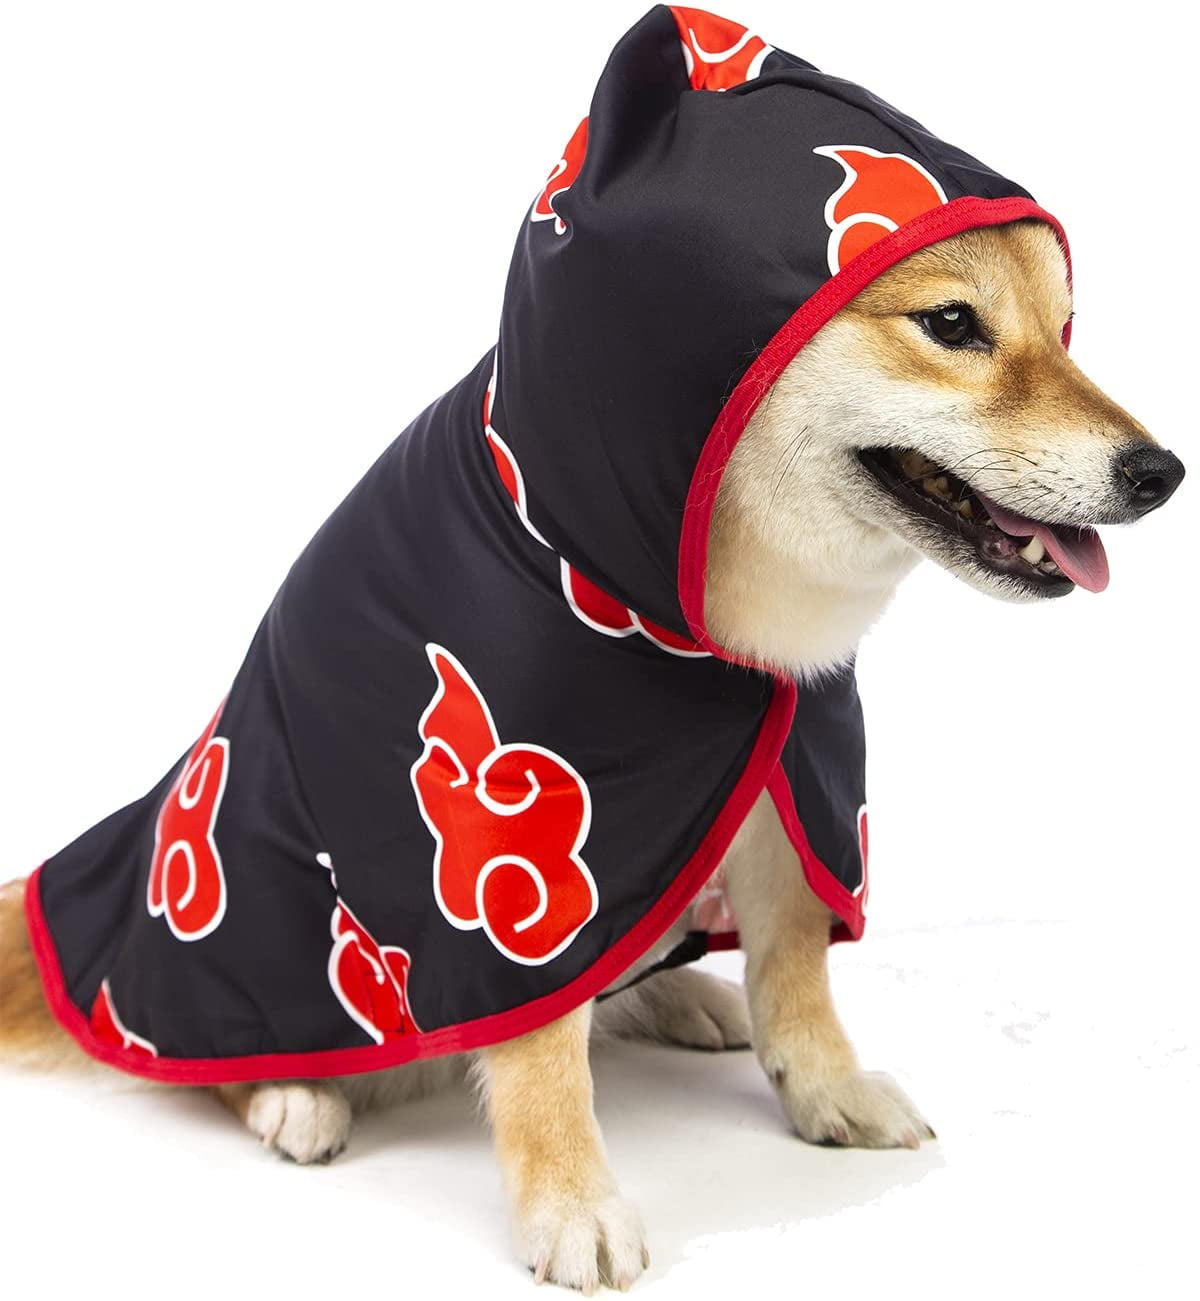 Buy Halloween Dog Costume Cat Clothes Funny Anime Cosplay Pet Clothing for  Small Dog Cats Outfits Online at Lowest Price in Ubuy India B09GFDZVNX